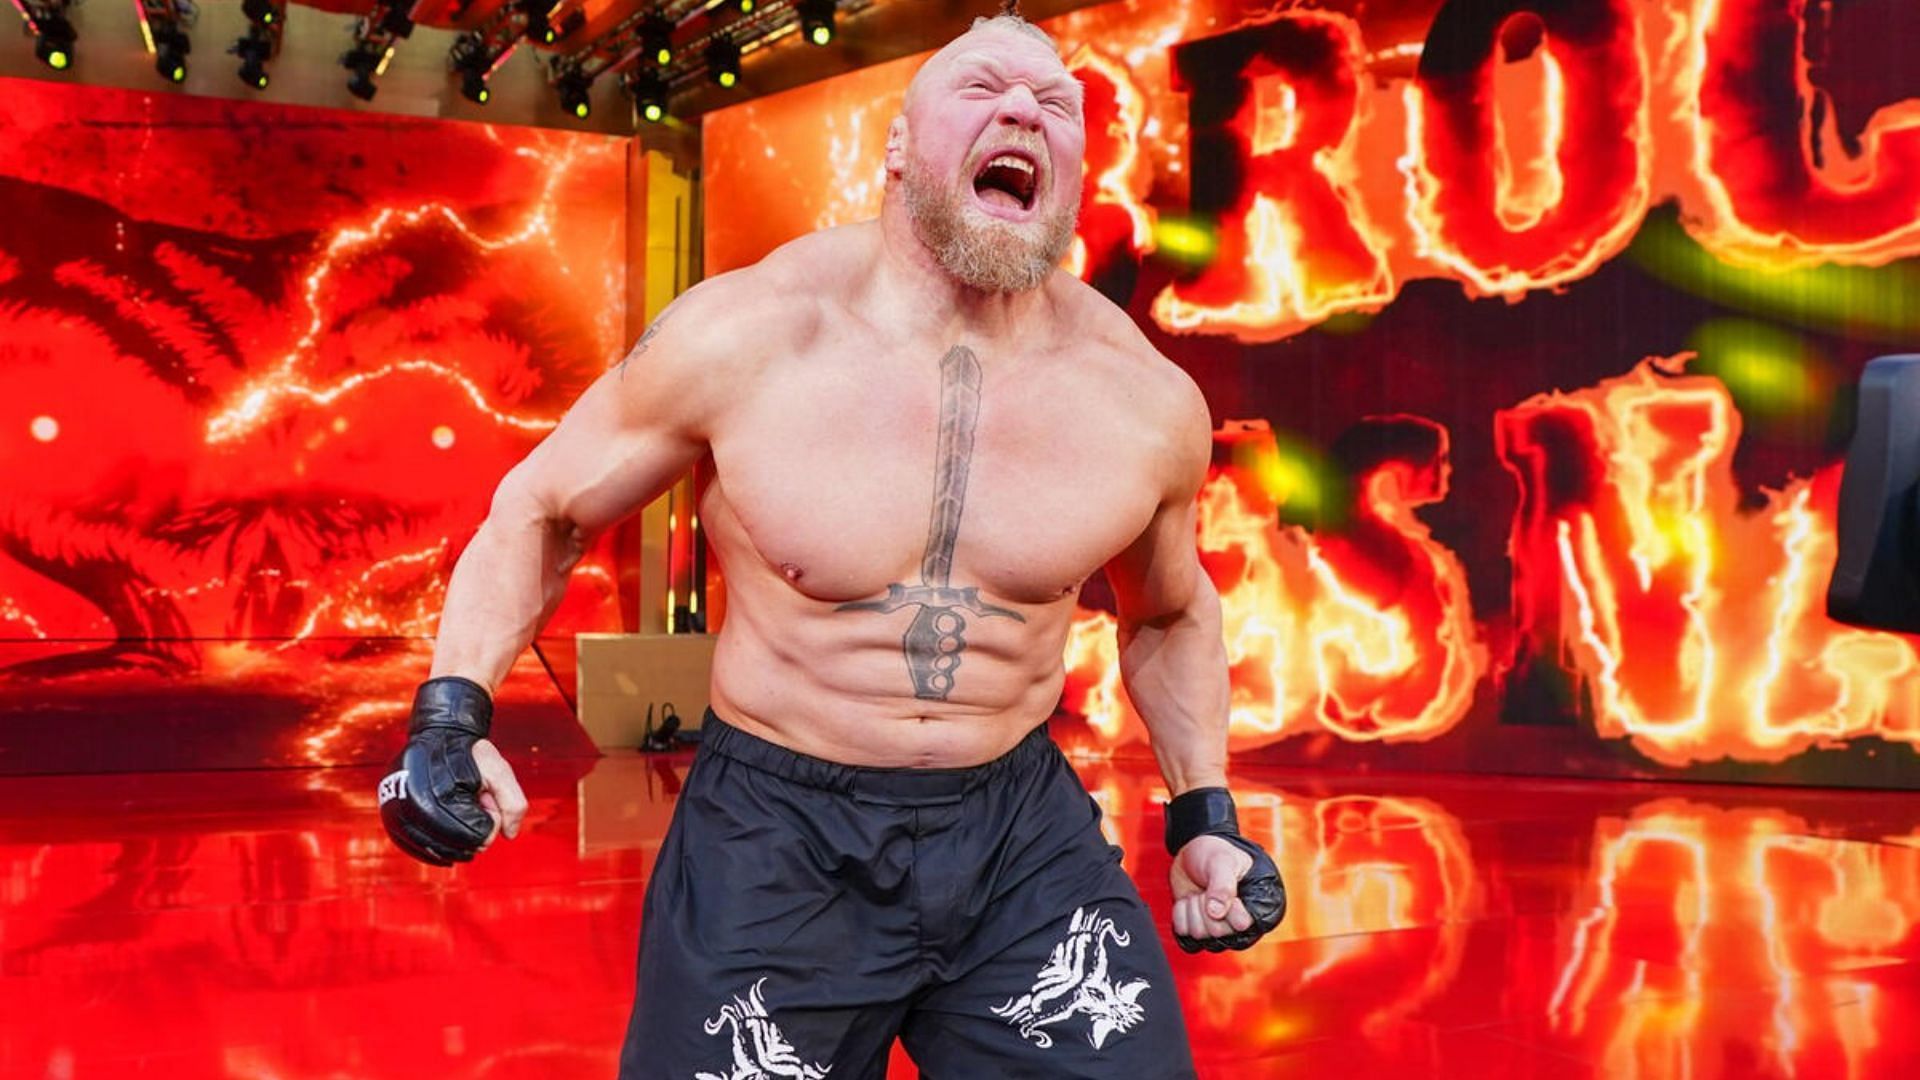 Brock Lesnar was a &quot;Beast&quot; both in the UFC and WWE